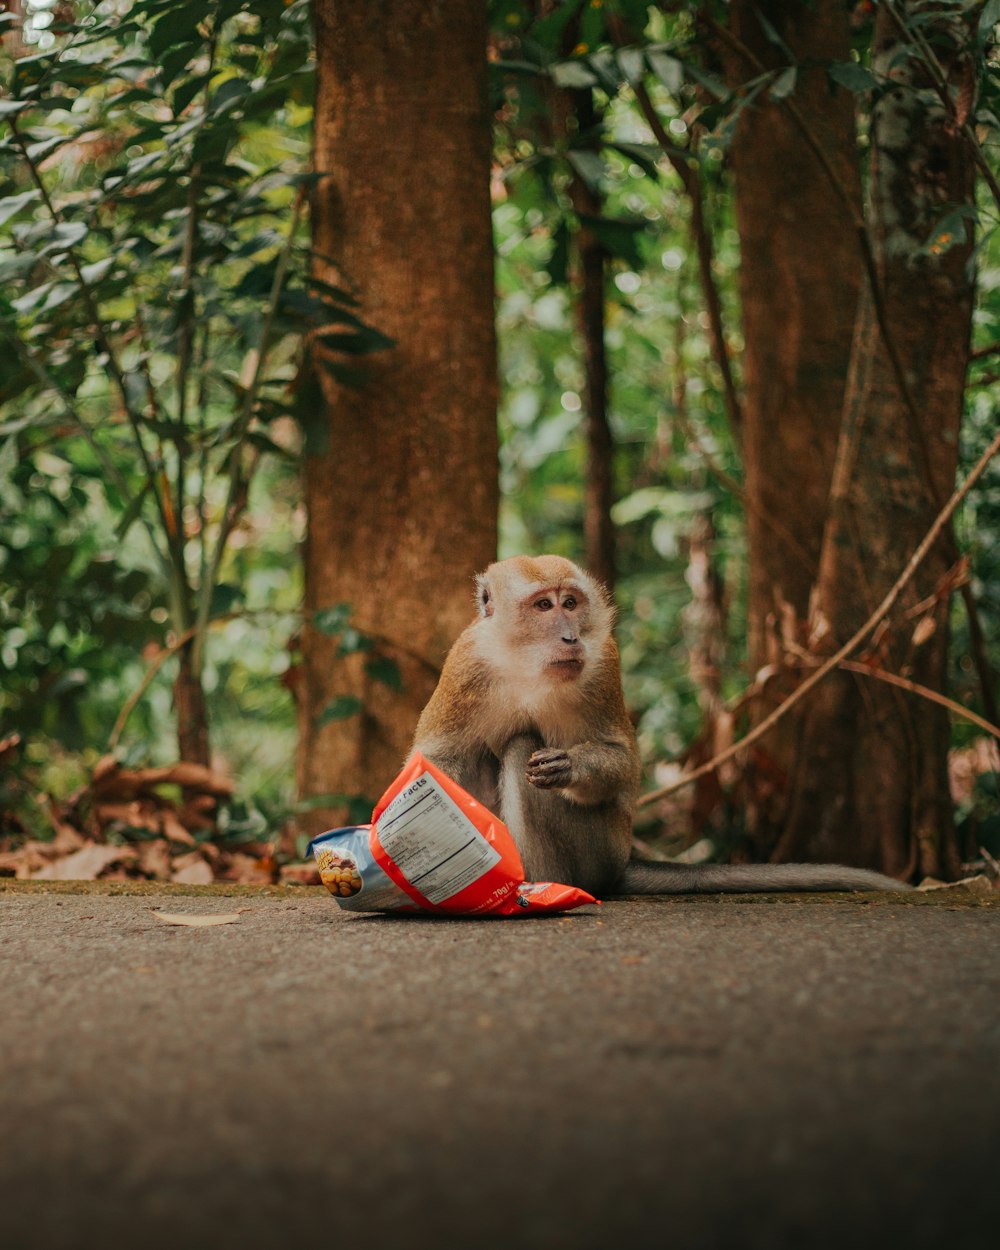 a monkey sitting on the ground next to a traffic cone